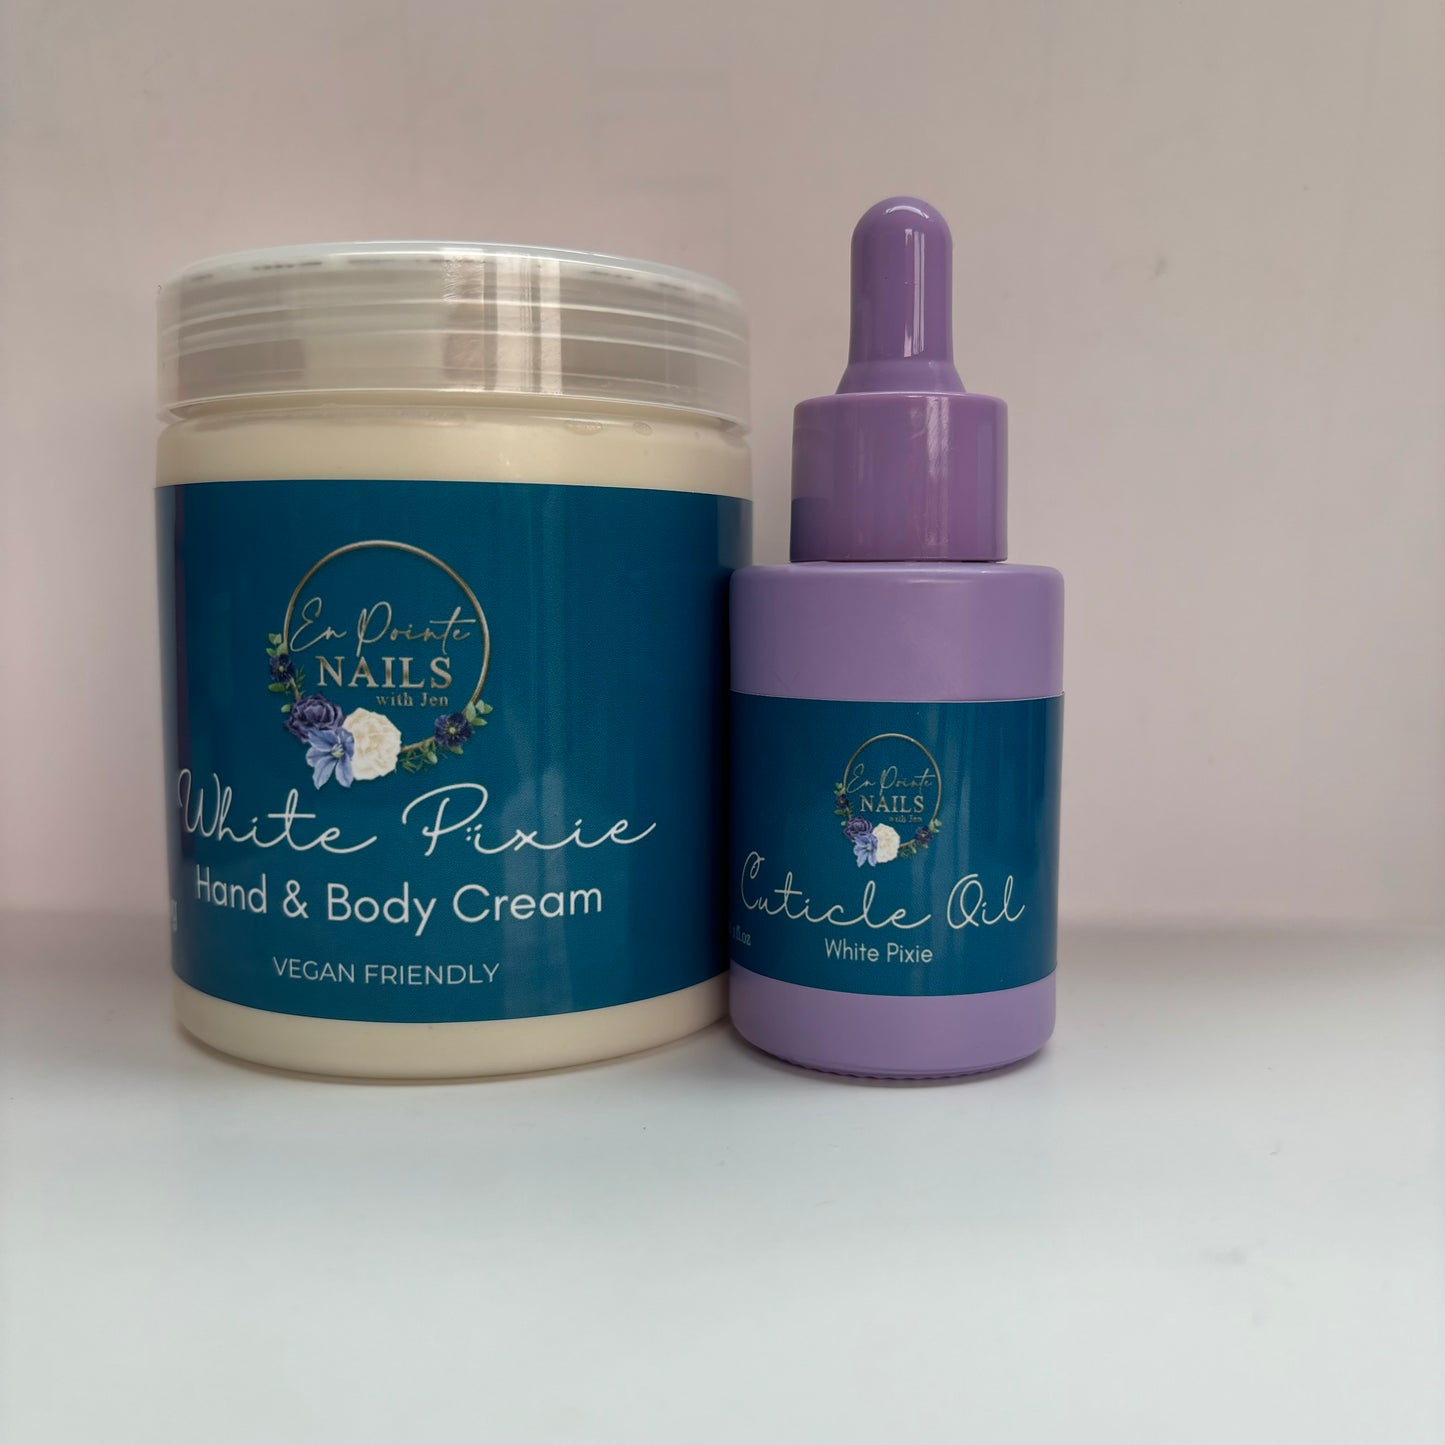 Own brand Hand and Body cream frosted tub